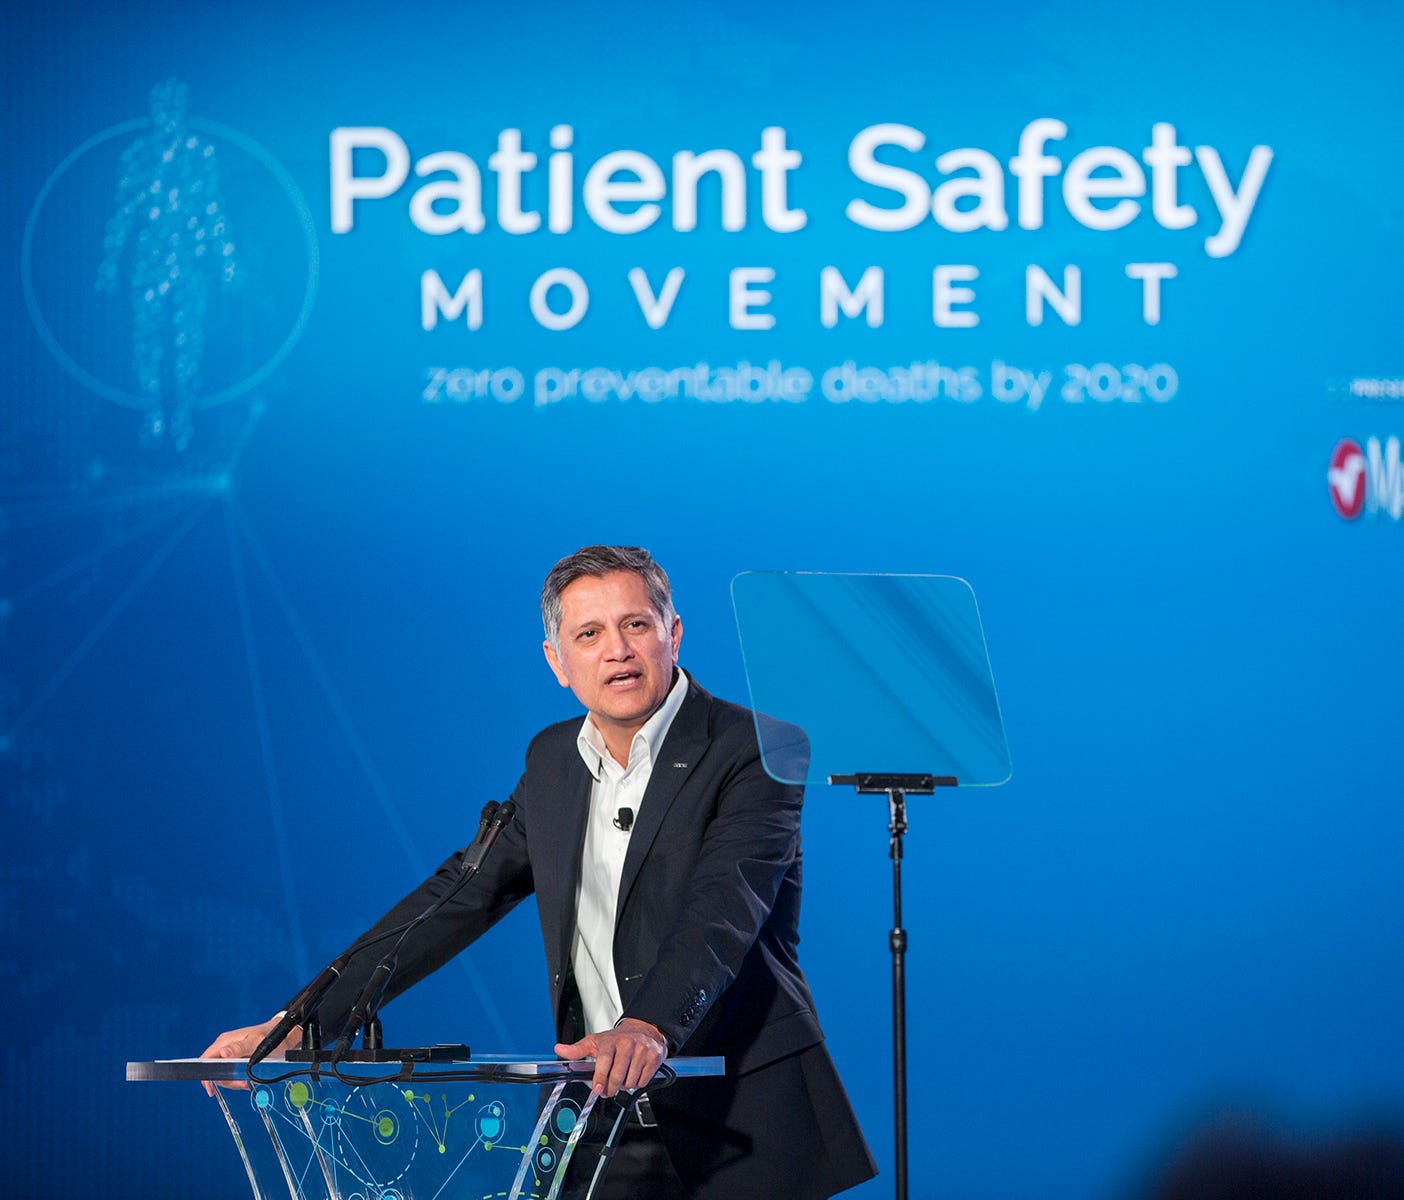 Joe Kiani, founder and CEO of the medical technology company Massimo, founded the Patient Safety Movement Foundation in 2012.